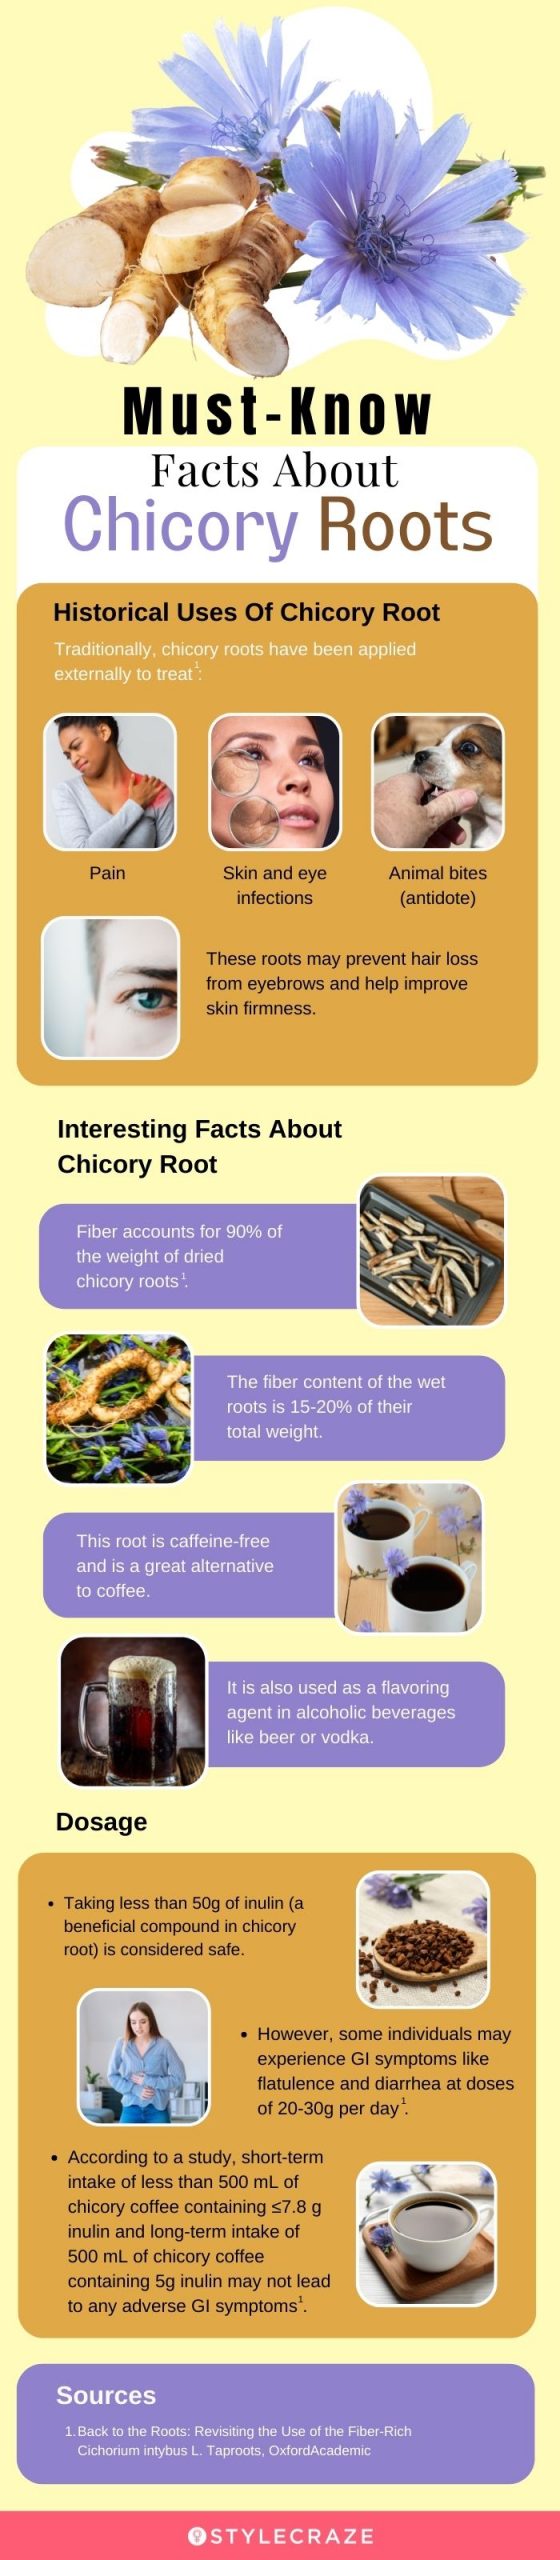 must know facts about chicory roots (infographic)